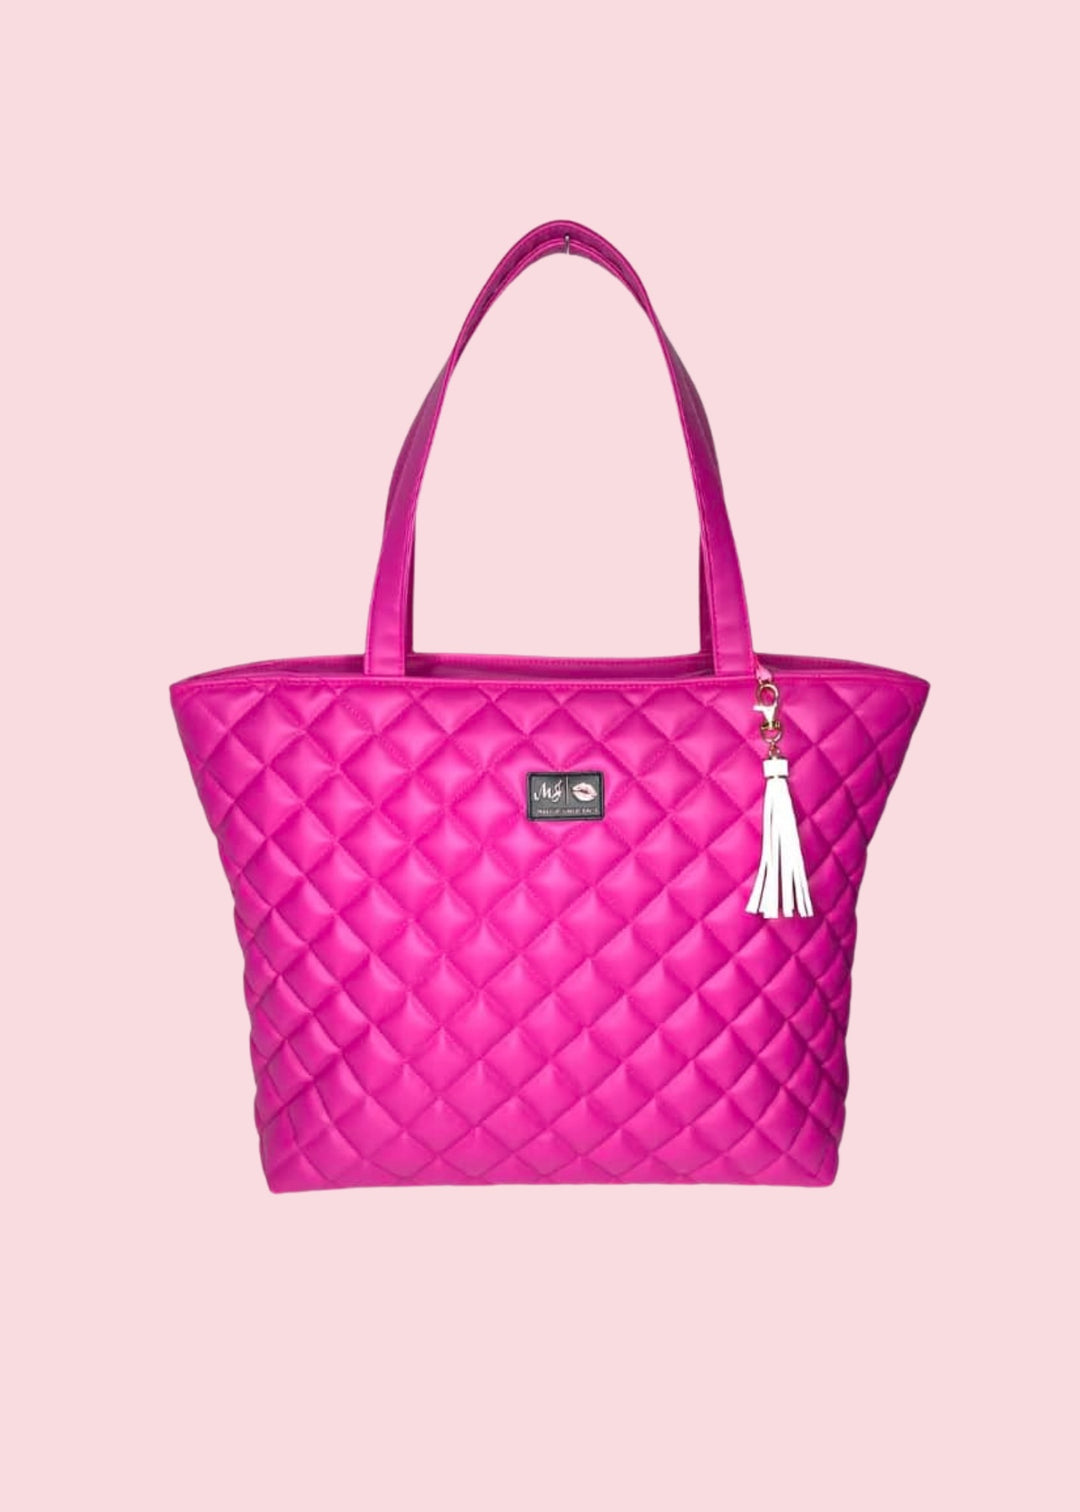 Makeup Junkie Bags - Luxe Hot Pink Quilted Travel Bags [Pre-Order]